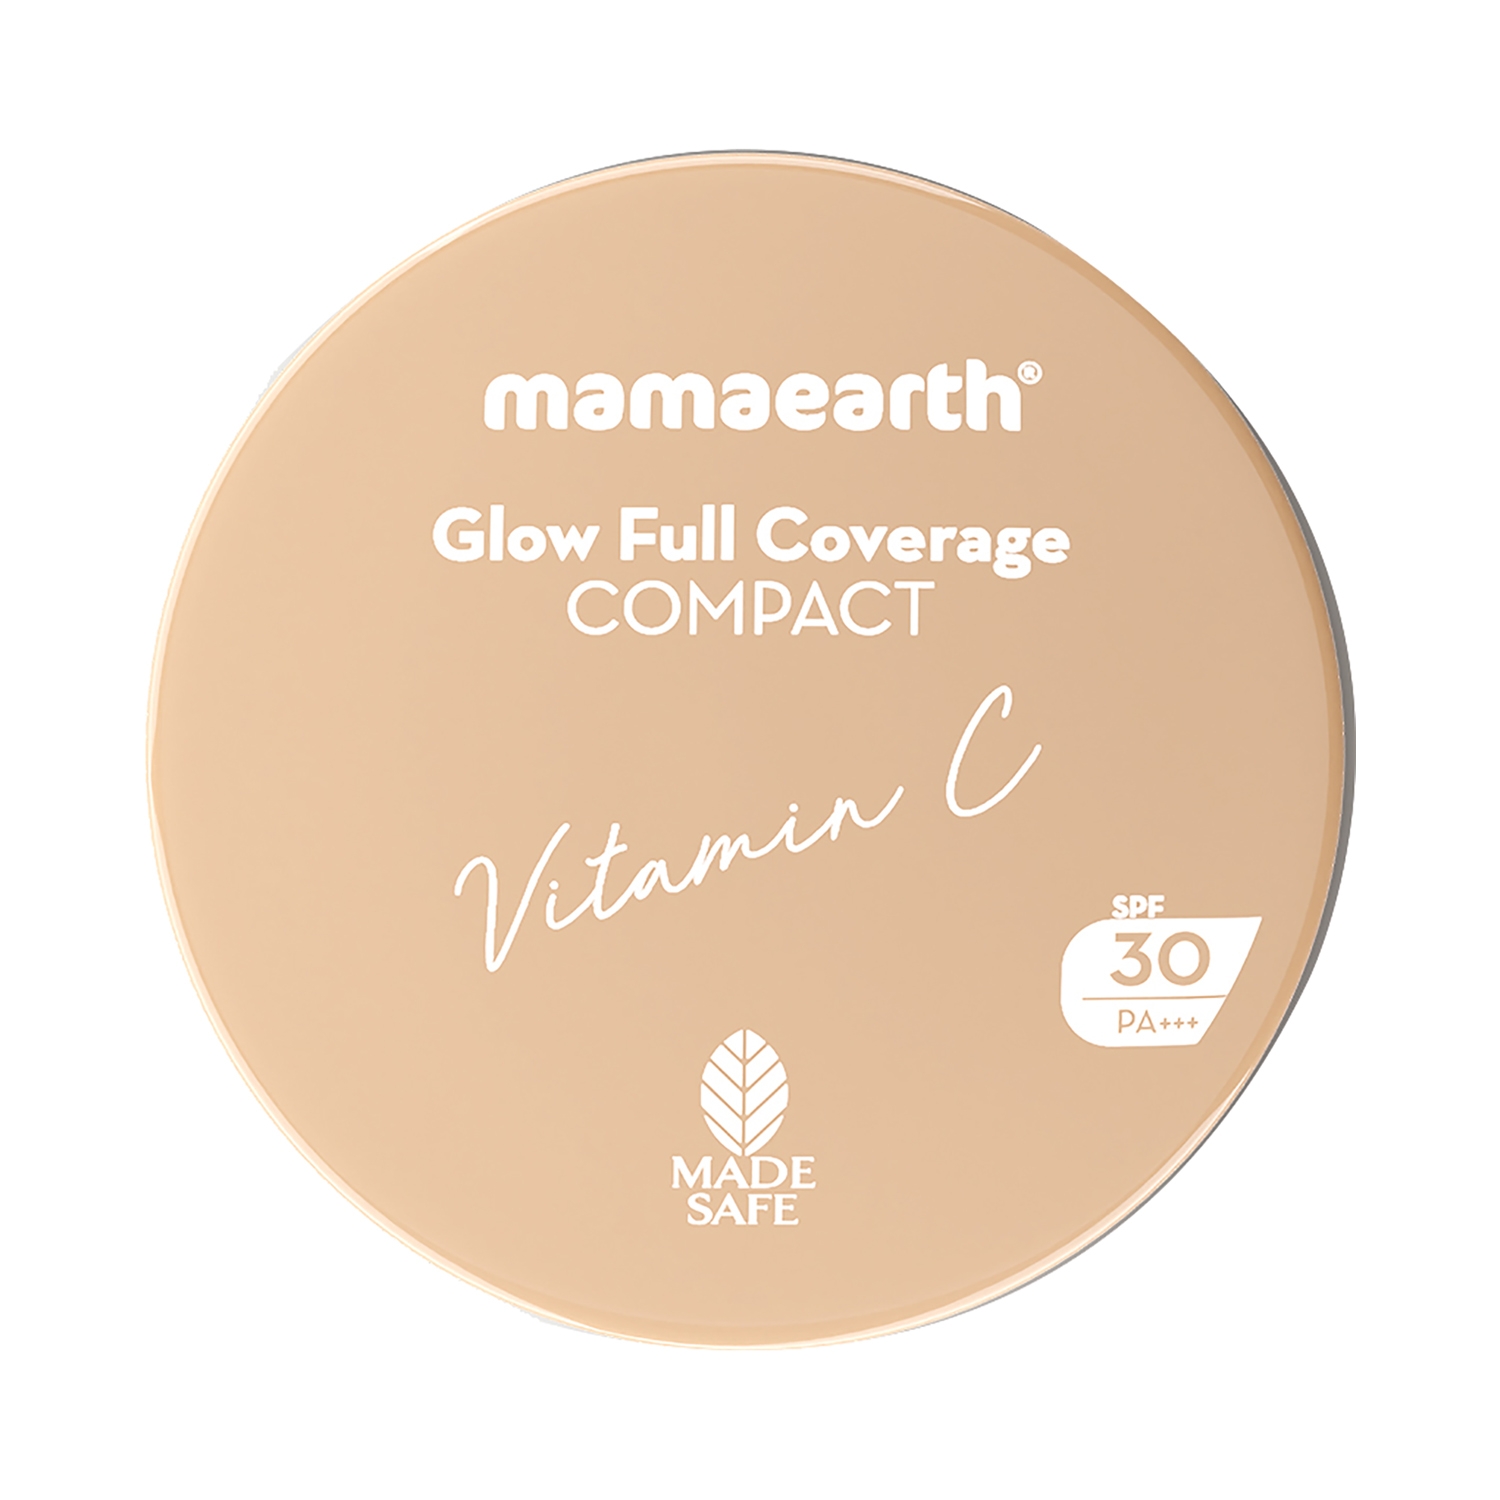 Mamaearth | Mamaearth Glow Full Coverage Compact SPF 30 PA+++ With Vitamin C - 04 Natural Glow (9g)